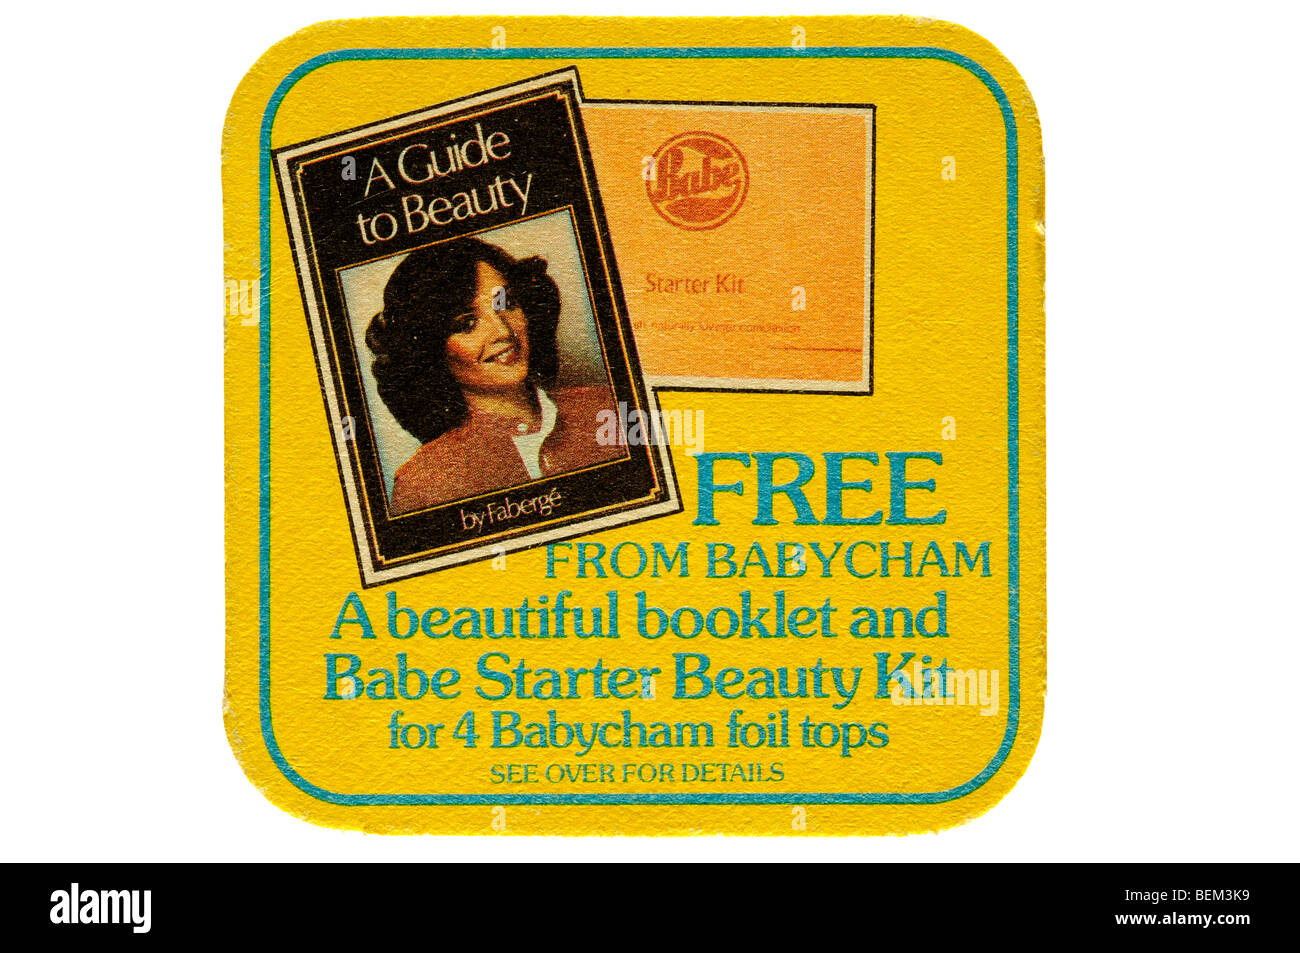 free from babycham a beautiful booklet and babe starter beauty kit for 4 foil babycham tops Stock Photo